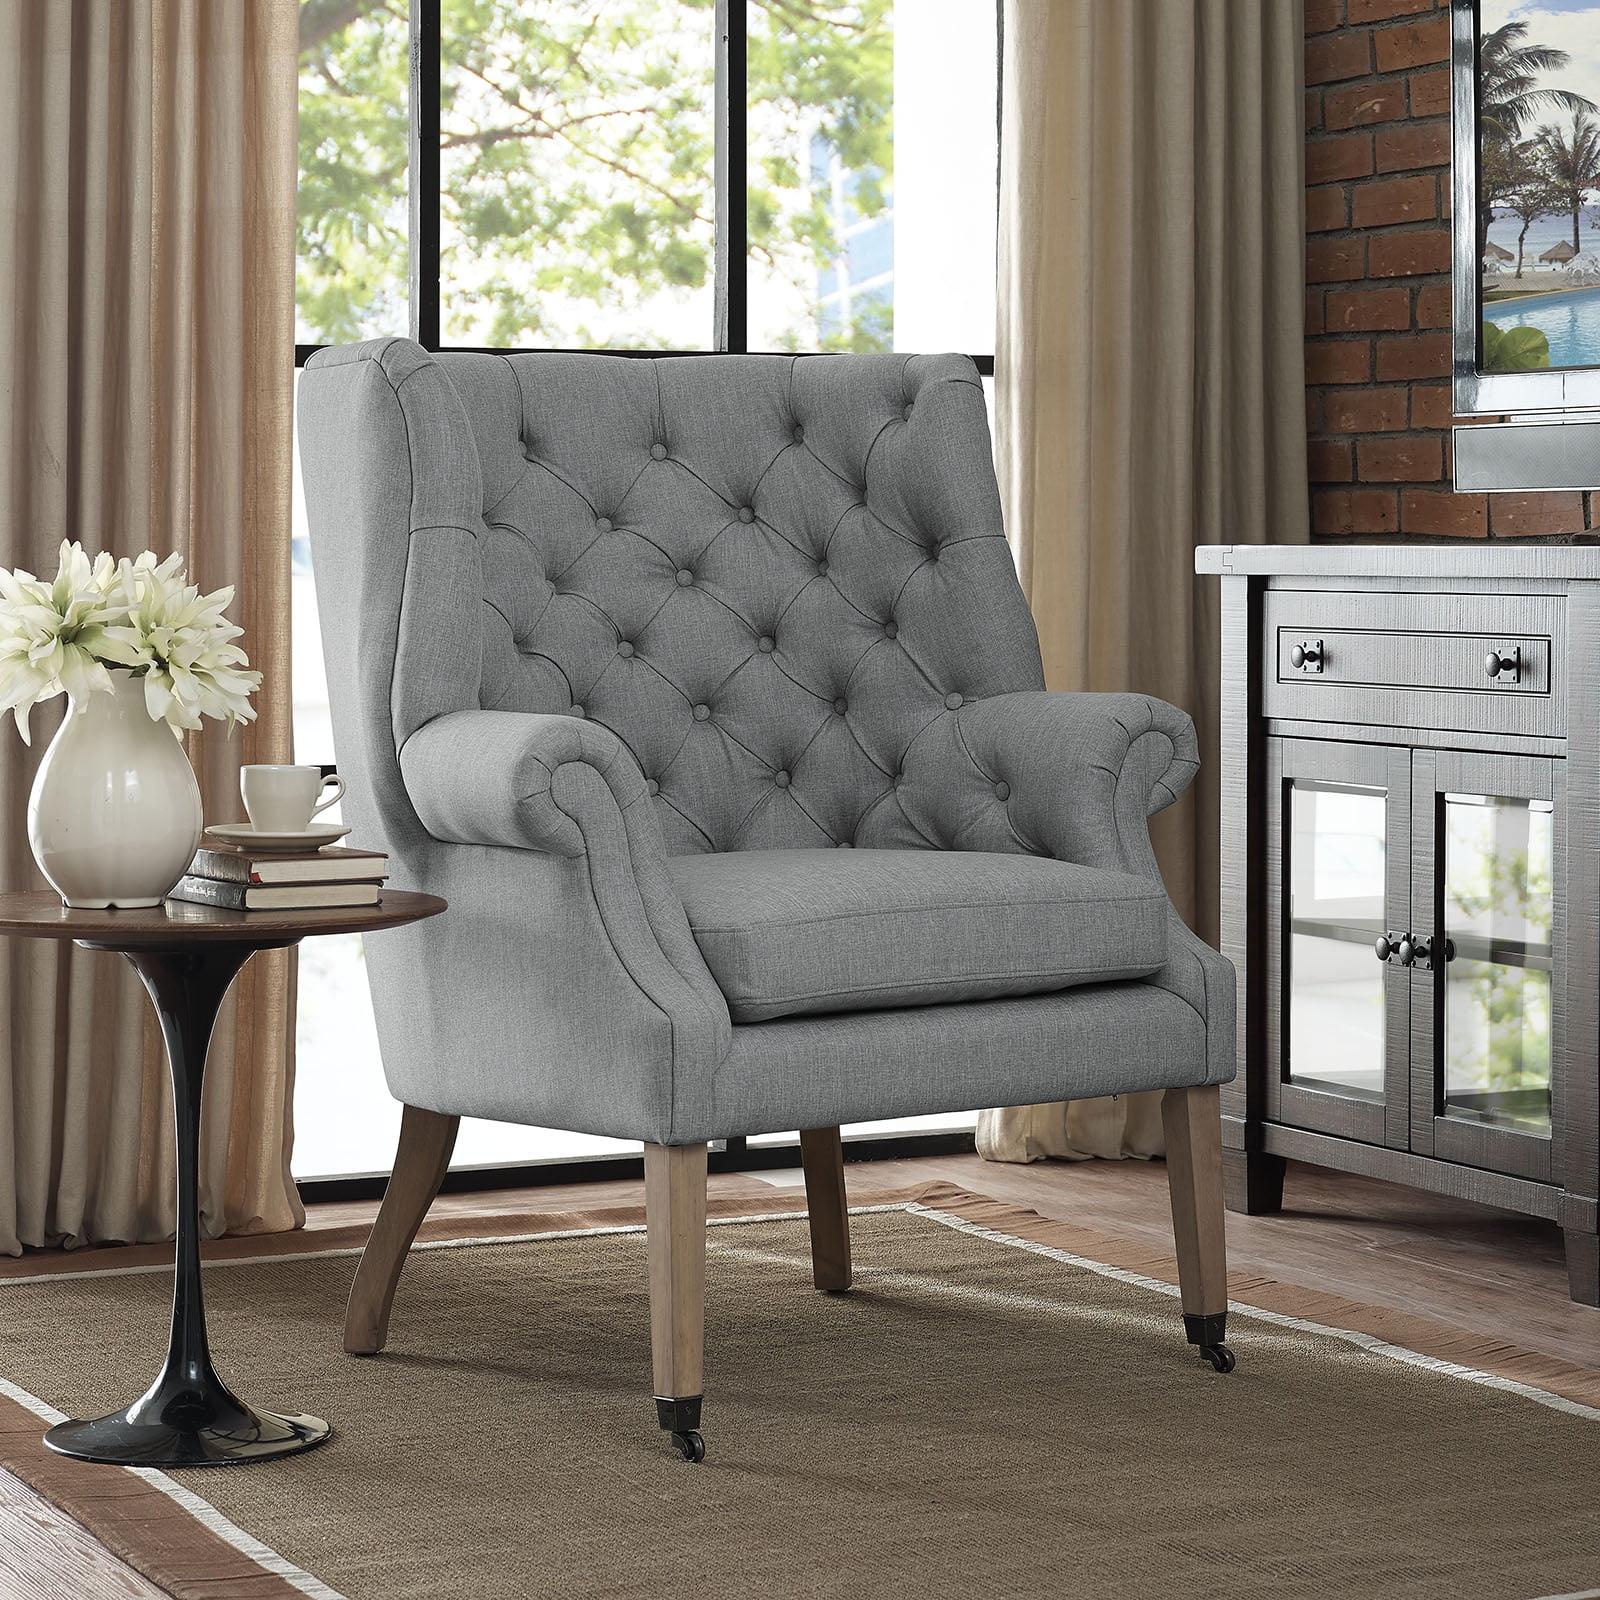 Luxurious Light Gray Velvet Accent Chair with Natural Wood Legs